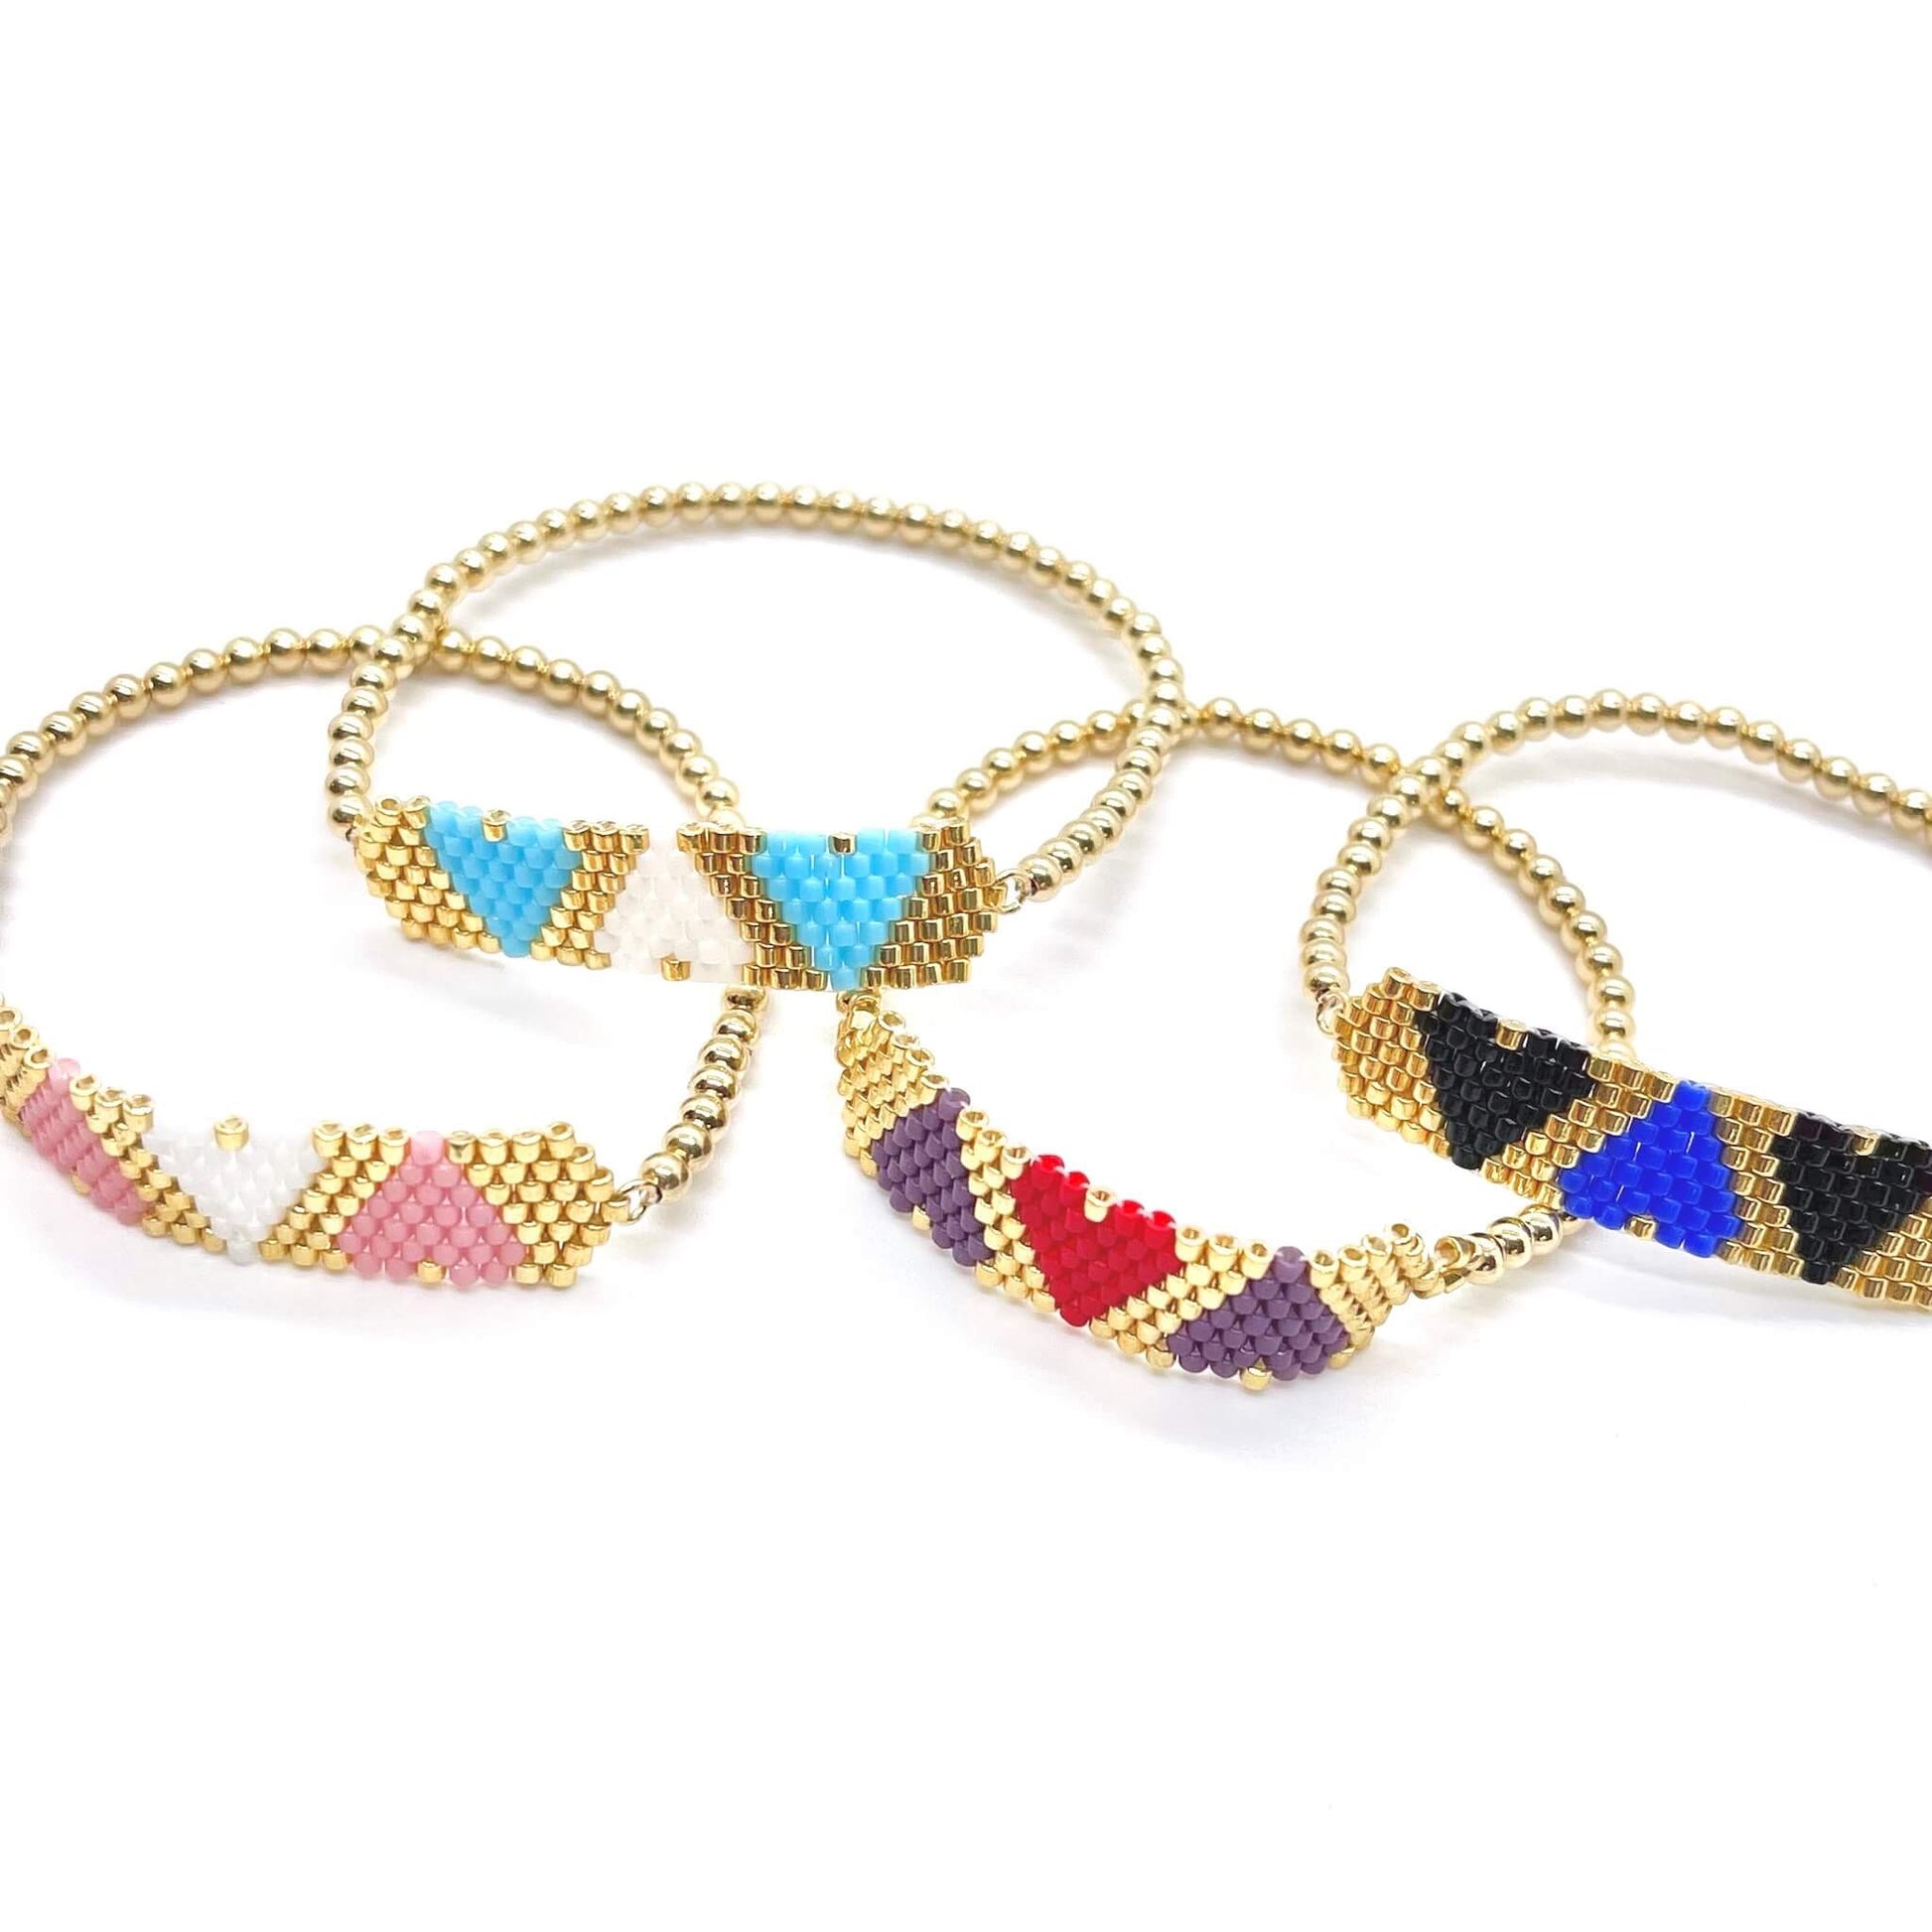 Heart trio beaded gold stretch bracelets with red, purple, blue, pink, and black seed bead hearts.